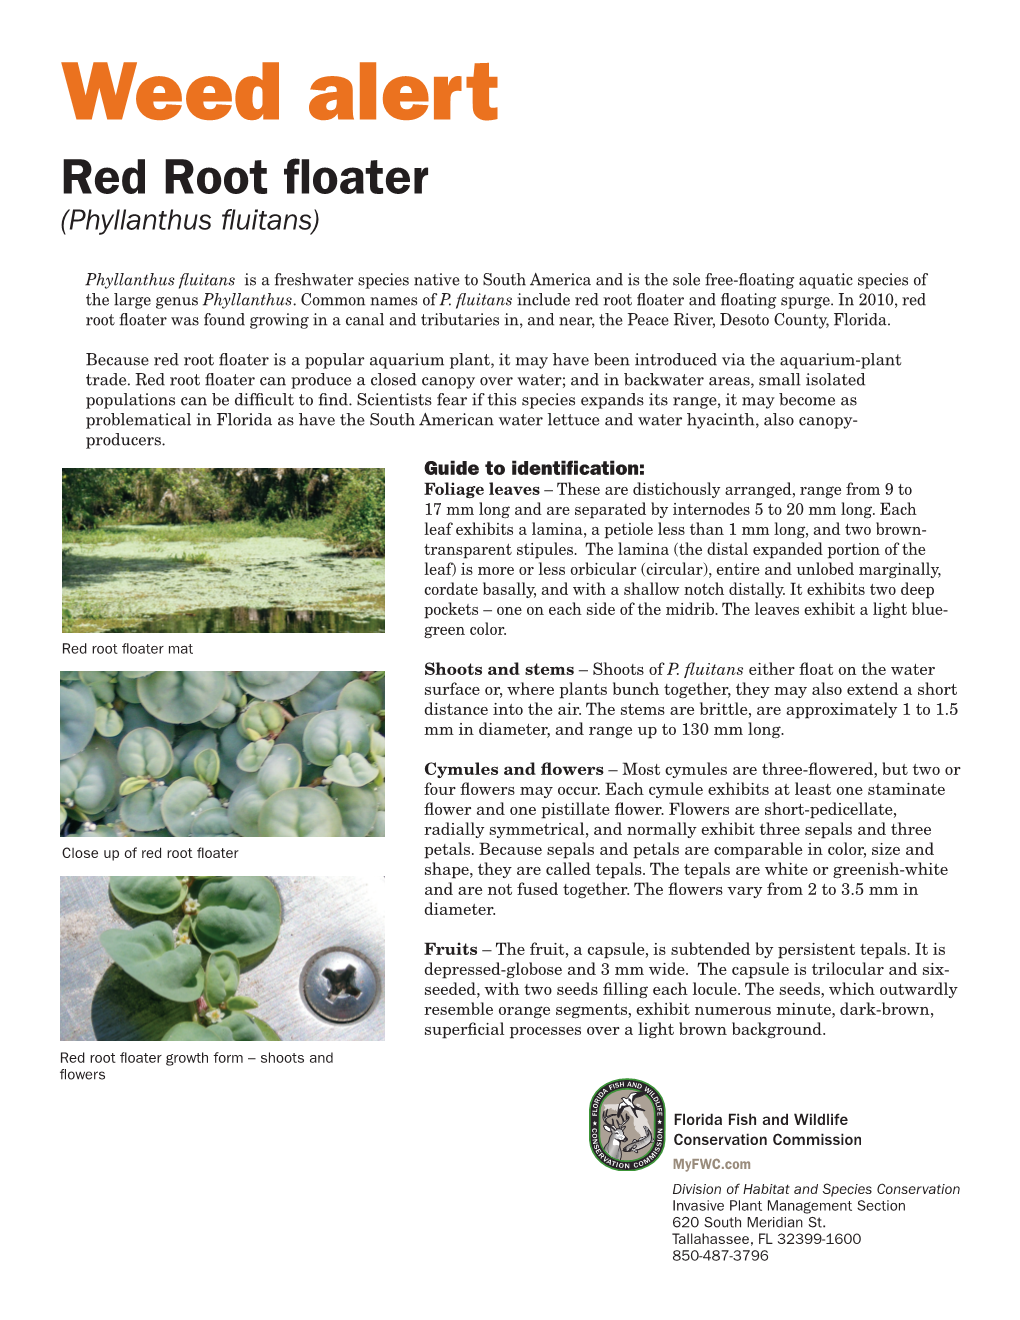 Weed Alert Red Root Floater (Phyllanthus Fluitans)